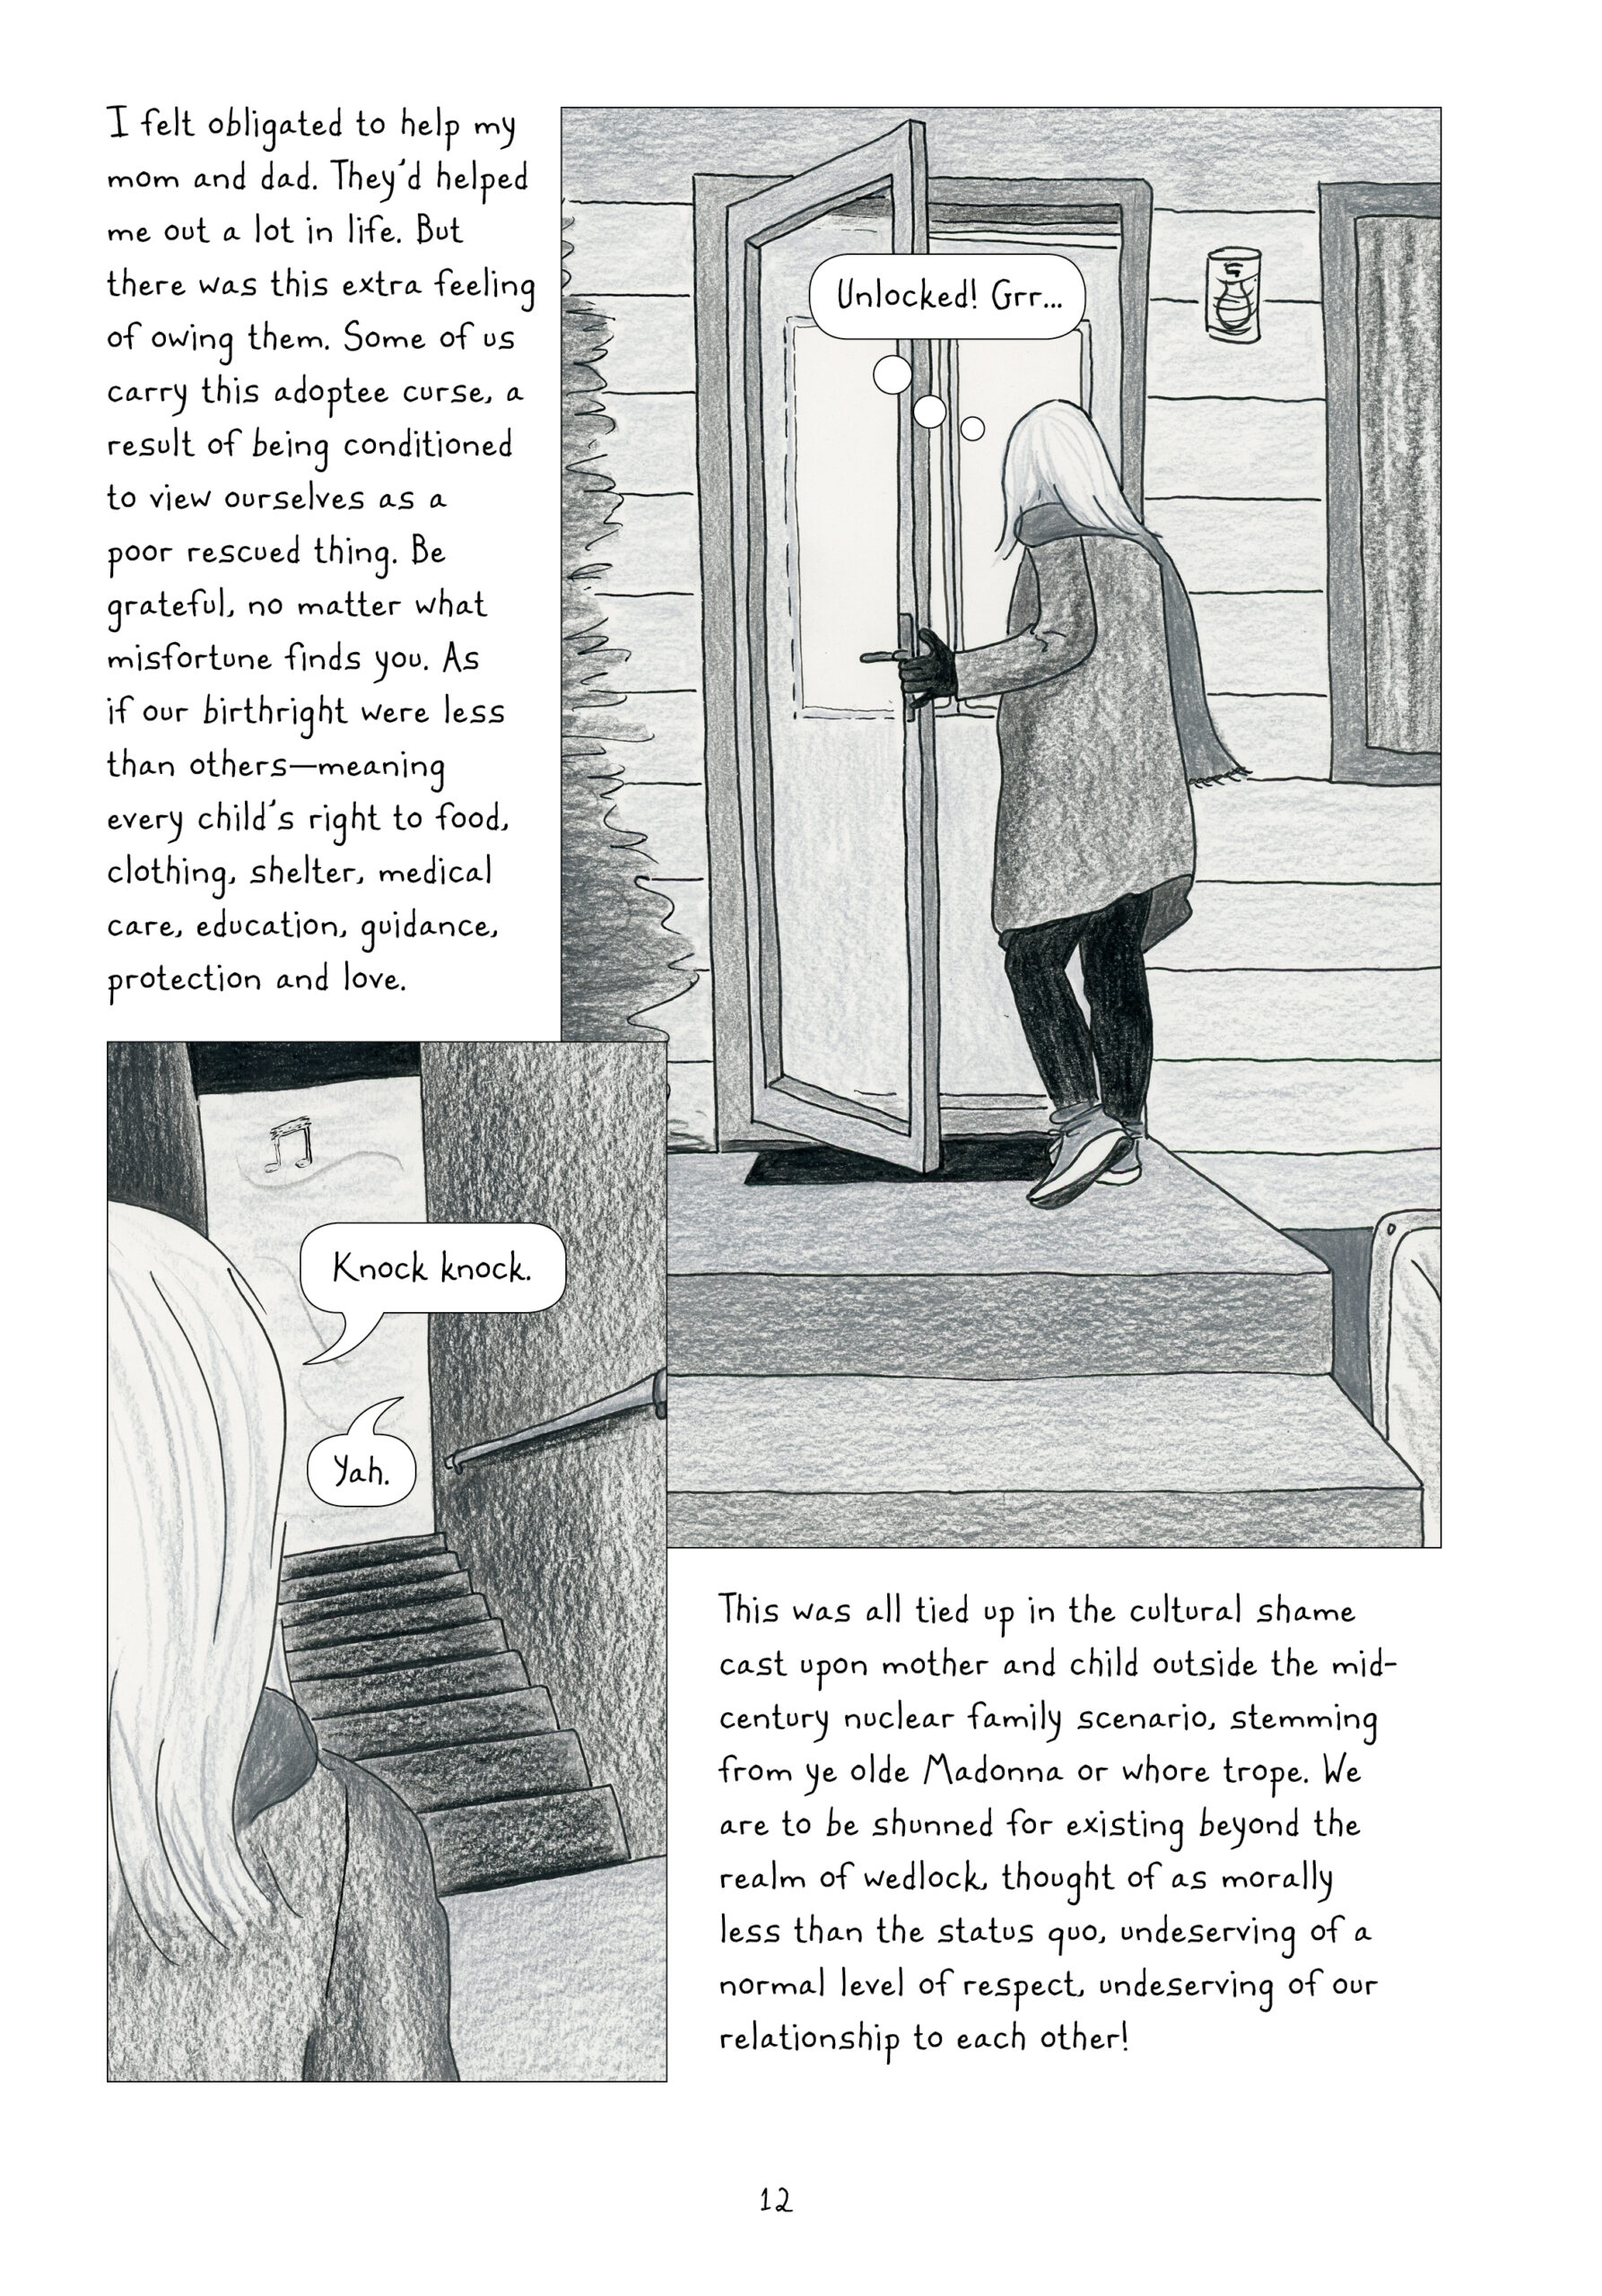 Two black and white panels in present day, one in the top right, the other in the bottom left slightly overlapping the former. Lynn finds the house door unlocked and is annoyed. She stands at the top of some stairs, and calls out, "Knock knock." An unidentified response of, "Yah," comes from the bottom.

Lynn reflects on the "adoptee curse" of feeling an extra sense of owing her parents, as if she did not have the same right to food, clothing, shelter, love, etc. as every other child. She links it to the "ye olde Madonna or whore trope" that shuns anyone existing out of wedlock.